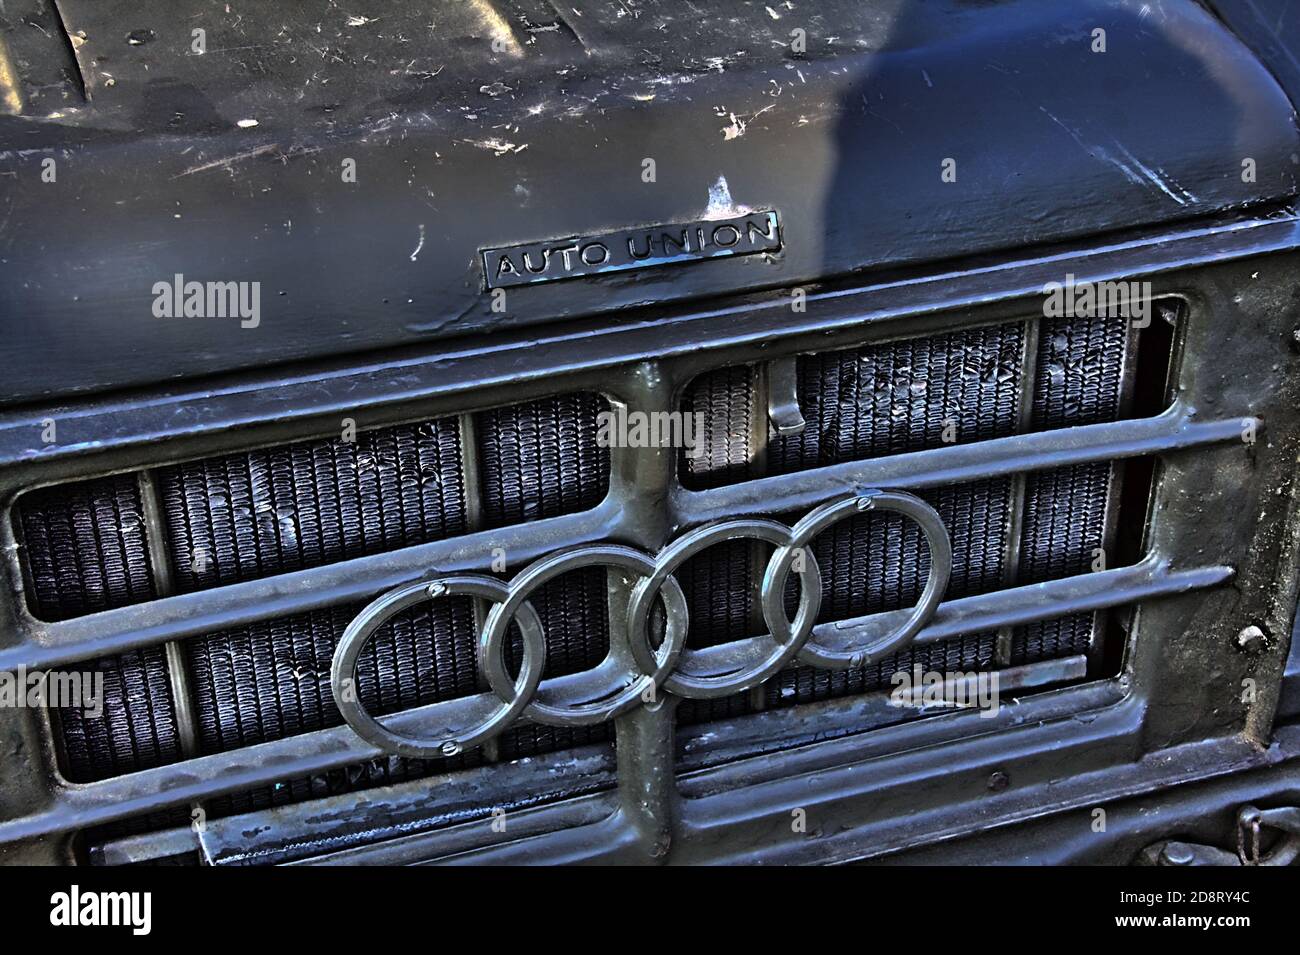 Auto Union Emblem with 4 rings Stock Photo